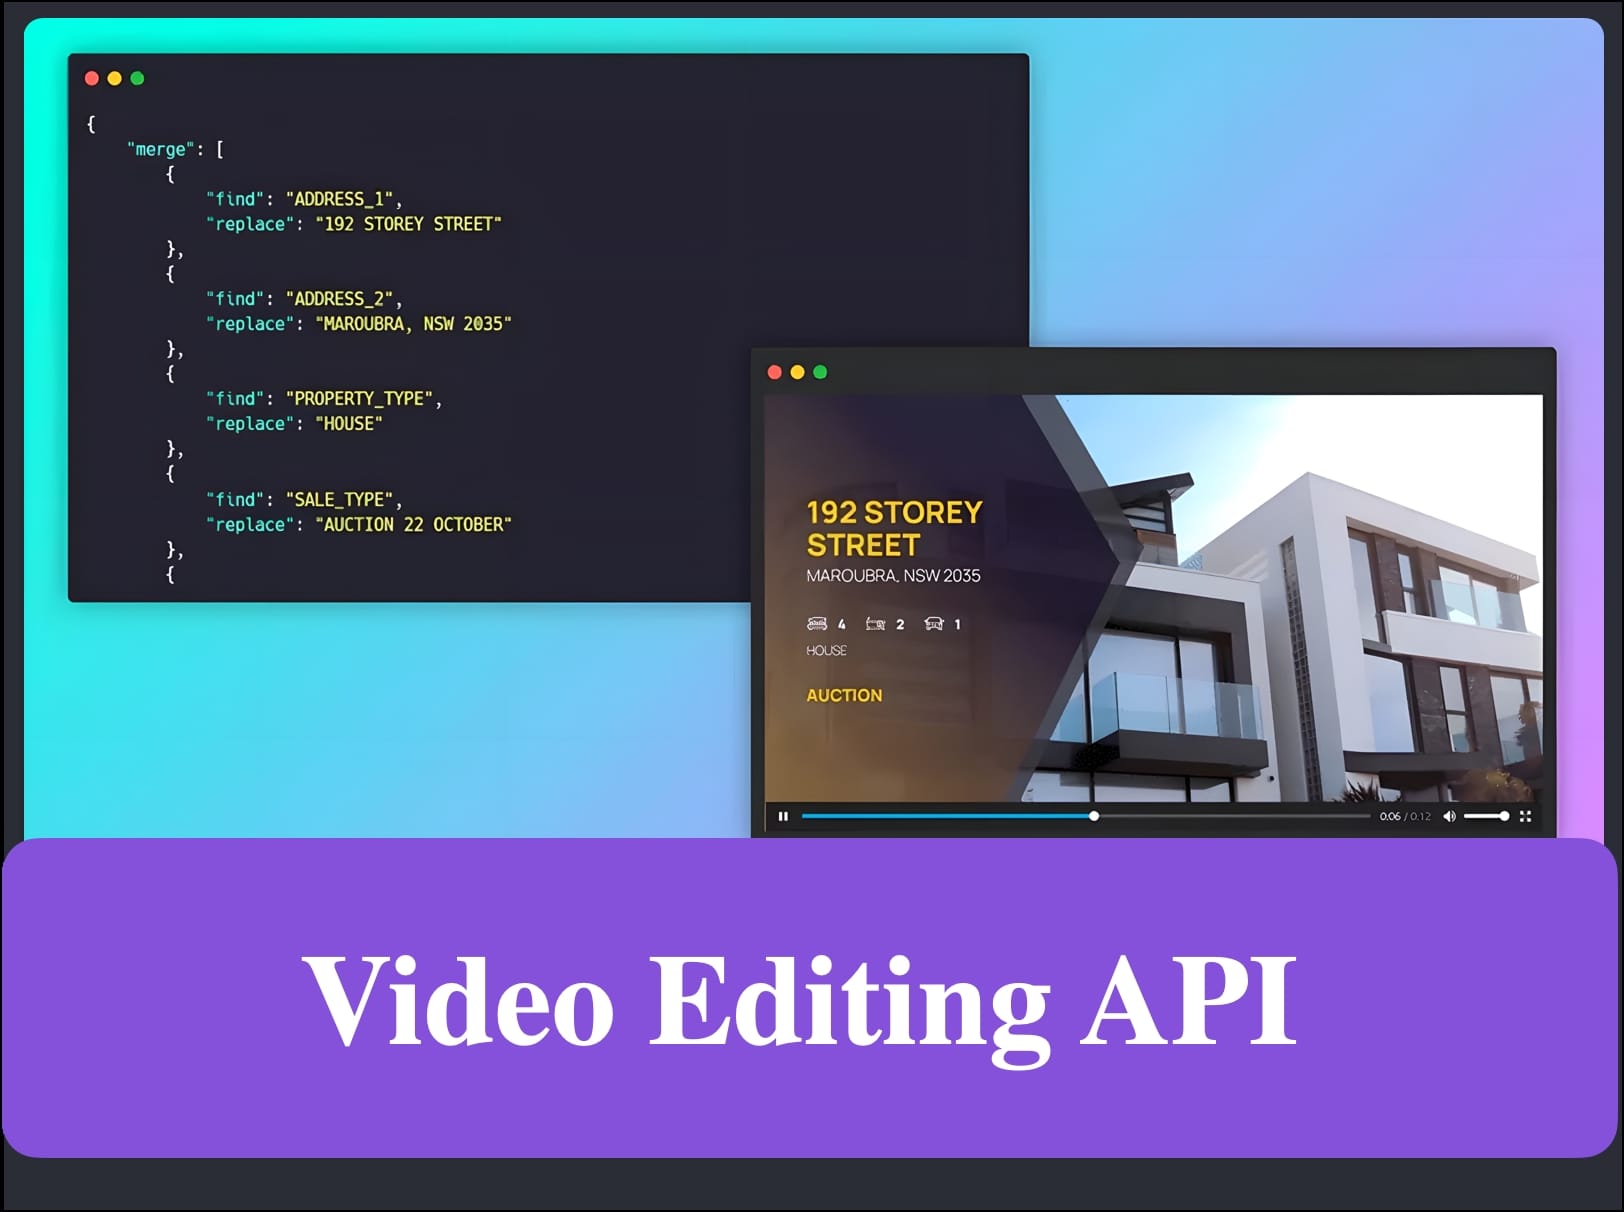 Simplify Video Editing with API Integration